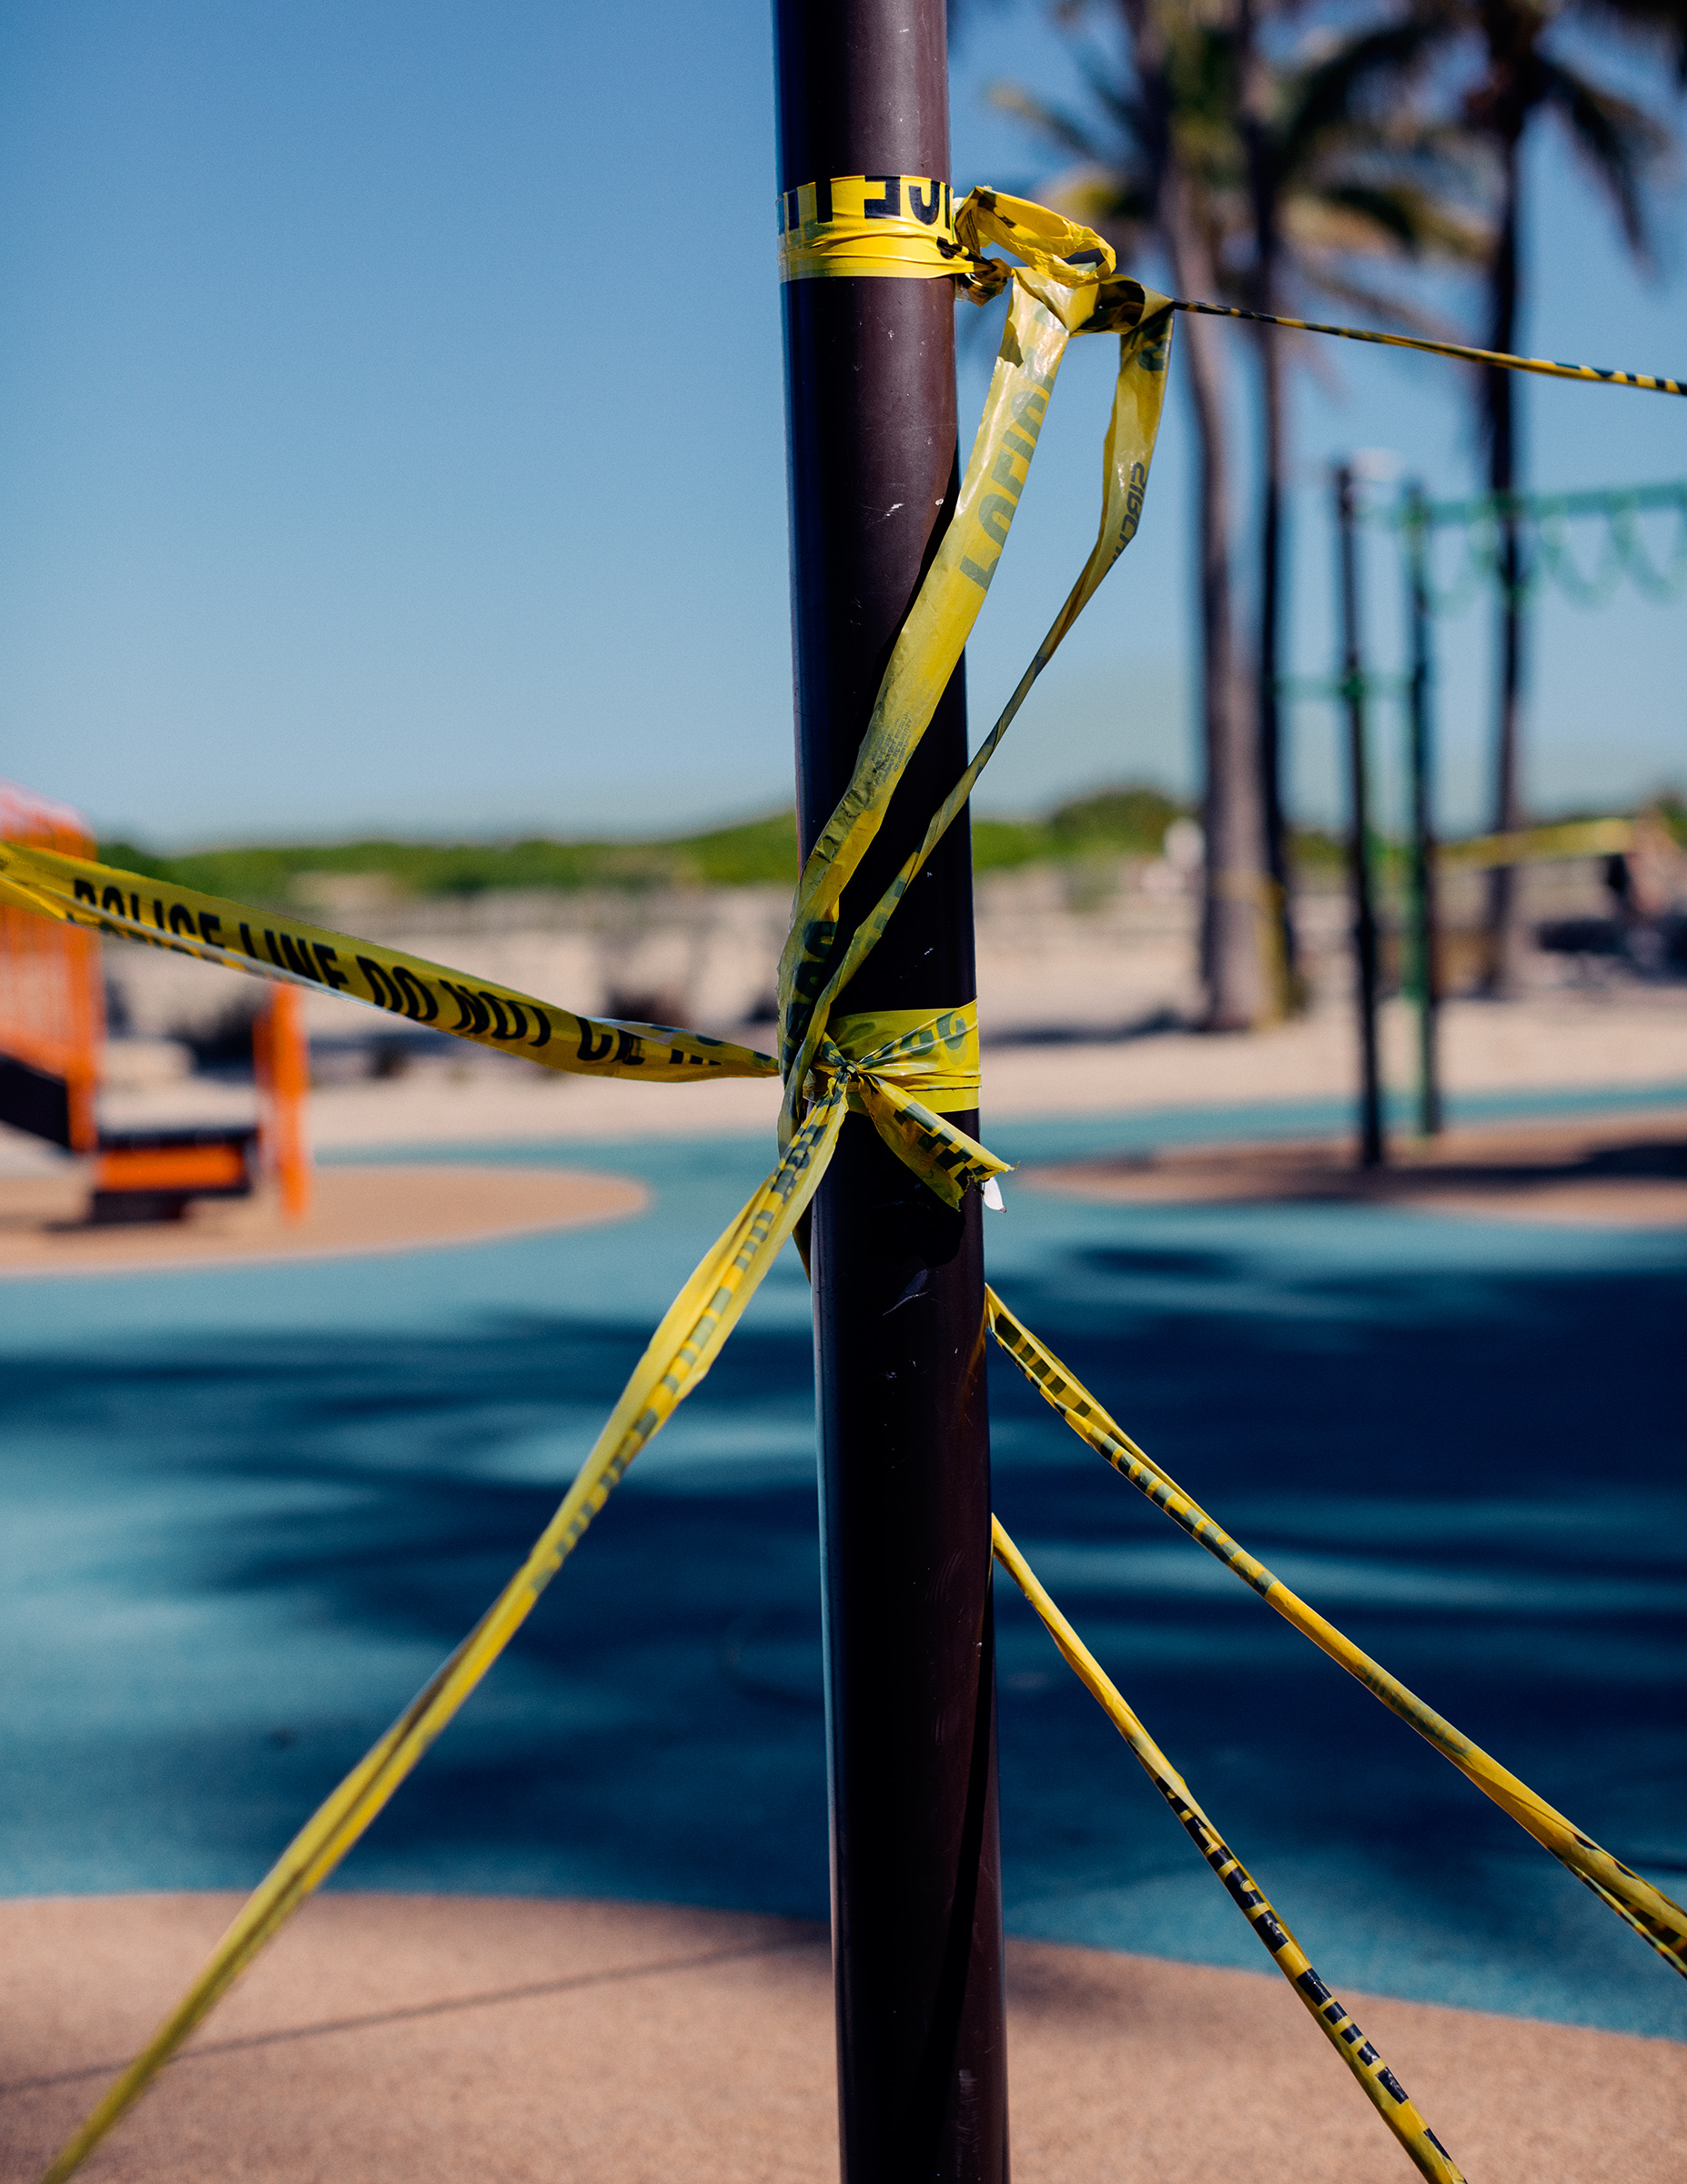 A playground in front of the temporarily closed Betsy Hotel is covered in caution tape as parks remain closed in Miami Beach. (Rose Marie Cromwell for TIME)